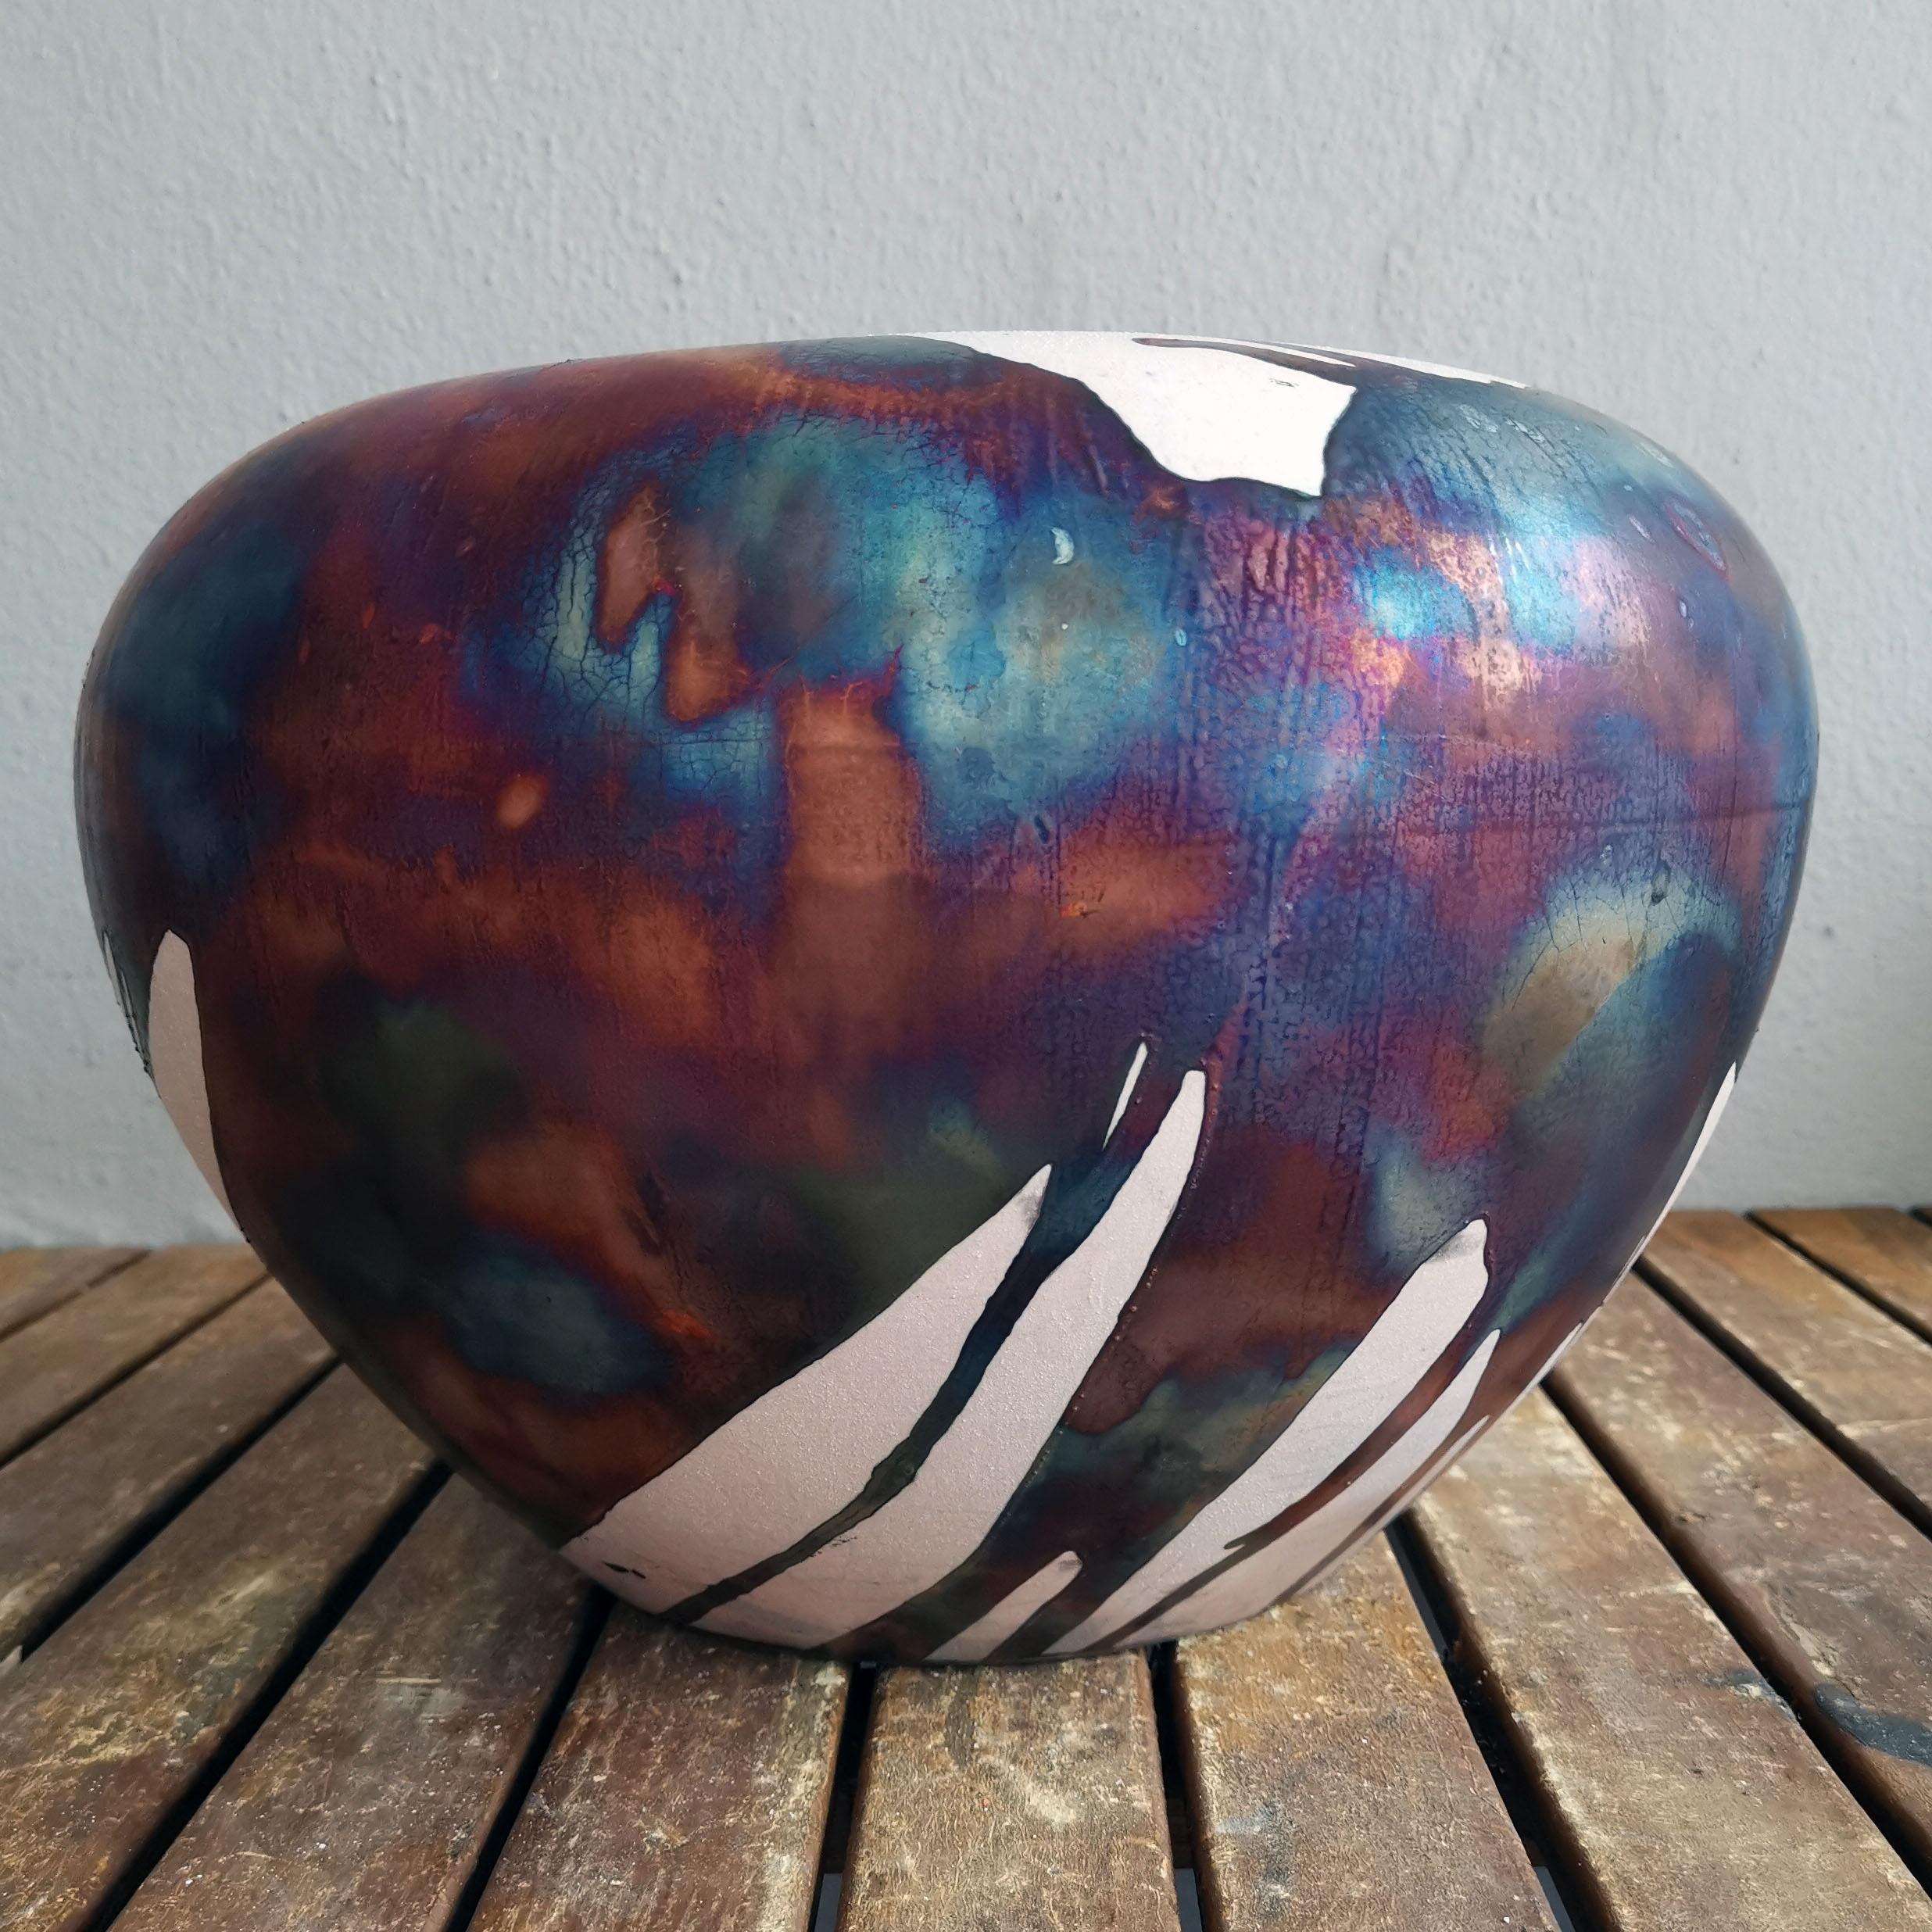 Pre-Order ~ Tsubomi ~ Bud

A mesmerizing sight to behold as soon as the rainbow-like patinas catch your eye. The Tsubomi Vase is a wide Art Series vase that resembles an unopened flower bud. This vase easily becomes a centerpiece in any environment